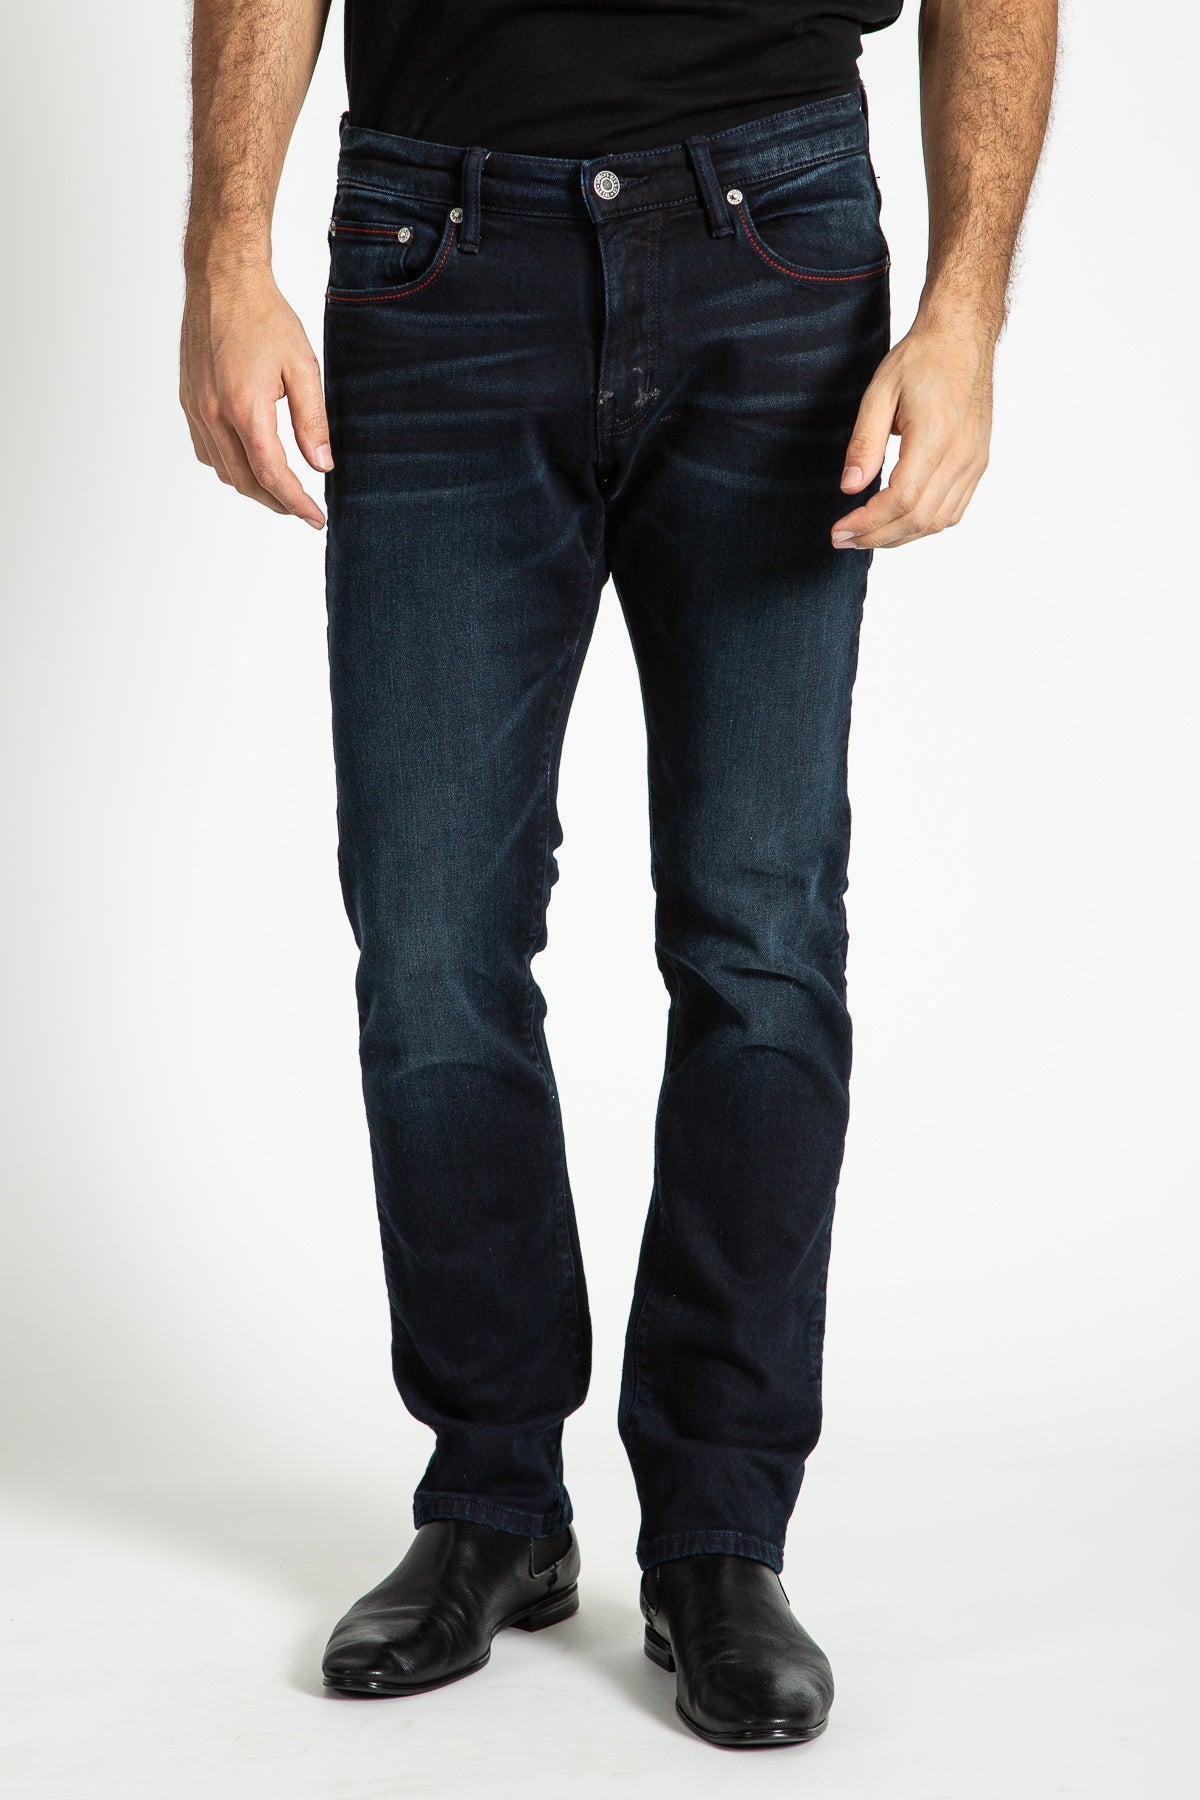 BARFLY SLIM JEANS IN TACOMA